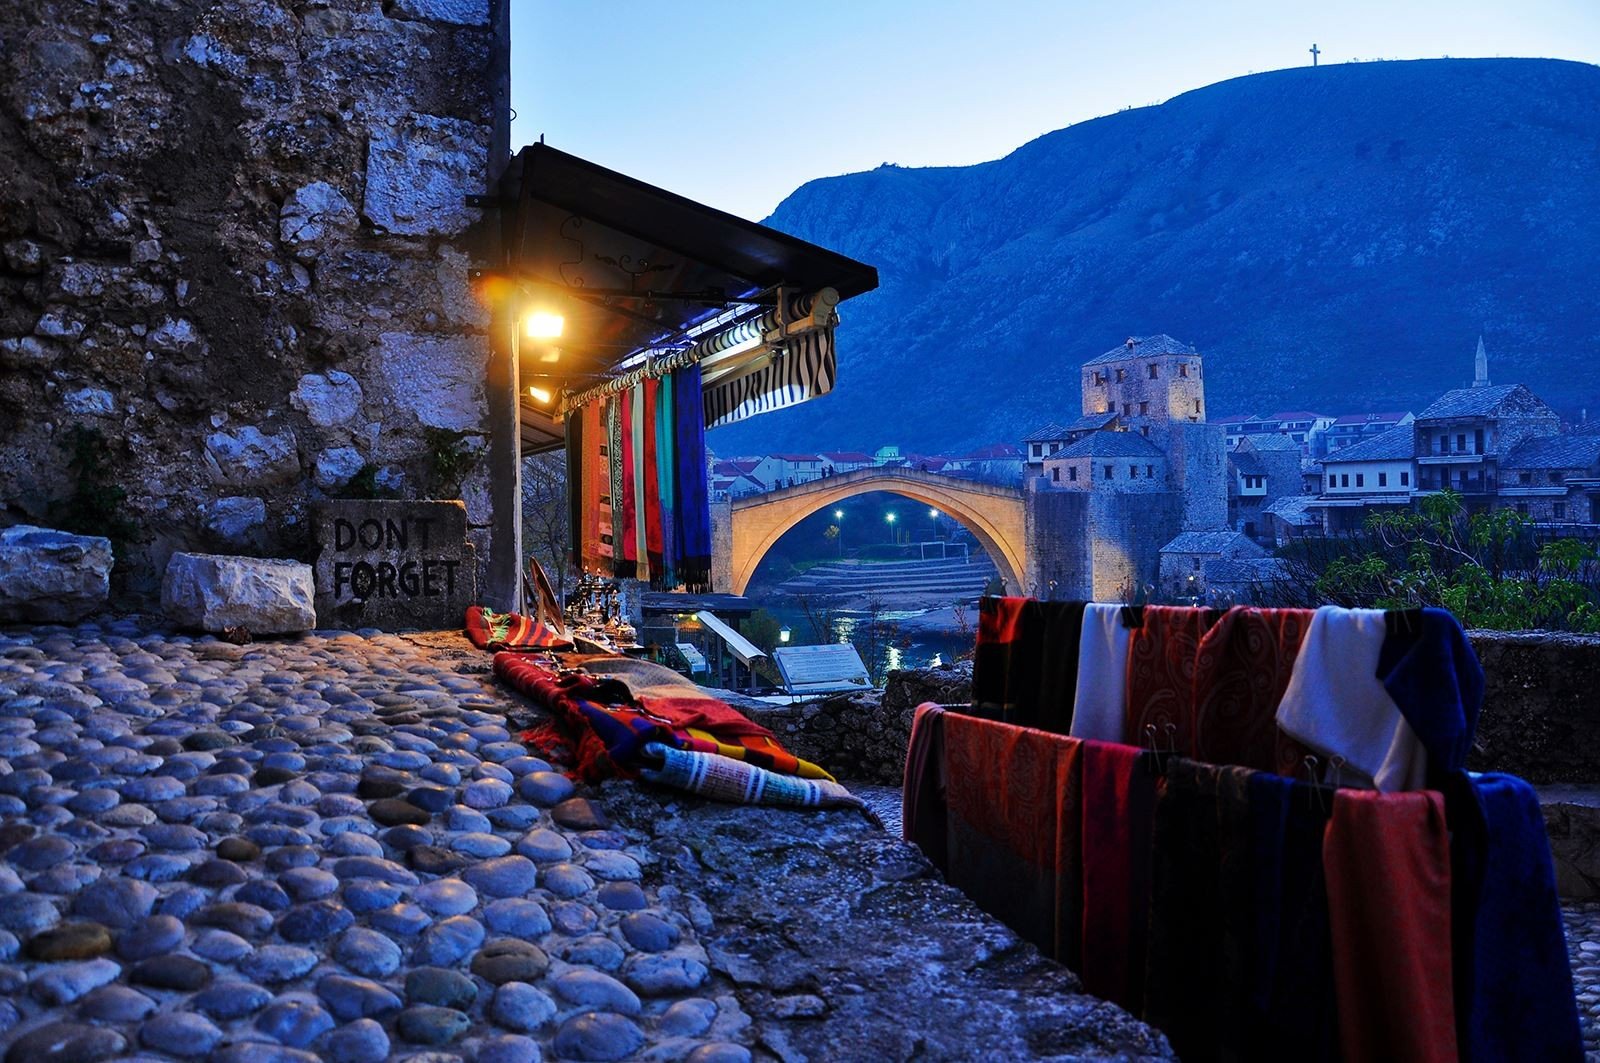 Mostar, Bosnia and Herzegovina, Old bridge, Bridge, Old, Night, Never Forget, Stari Most, Mosque, Mosques, Leather clothing Wallpaper